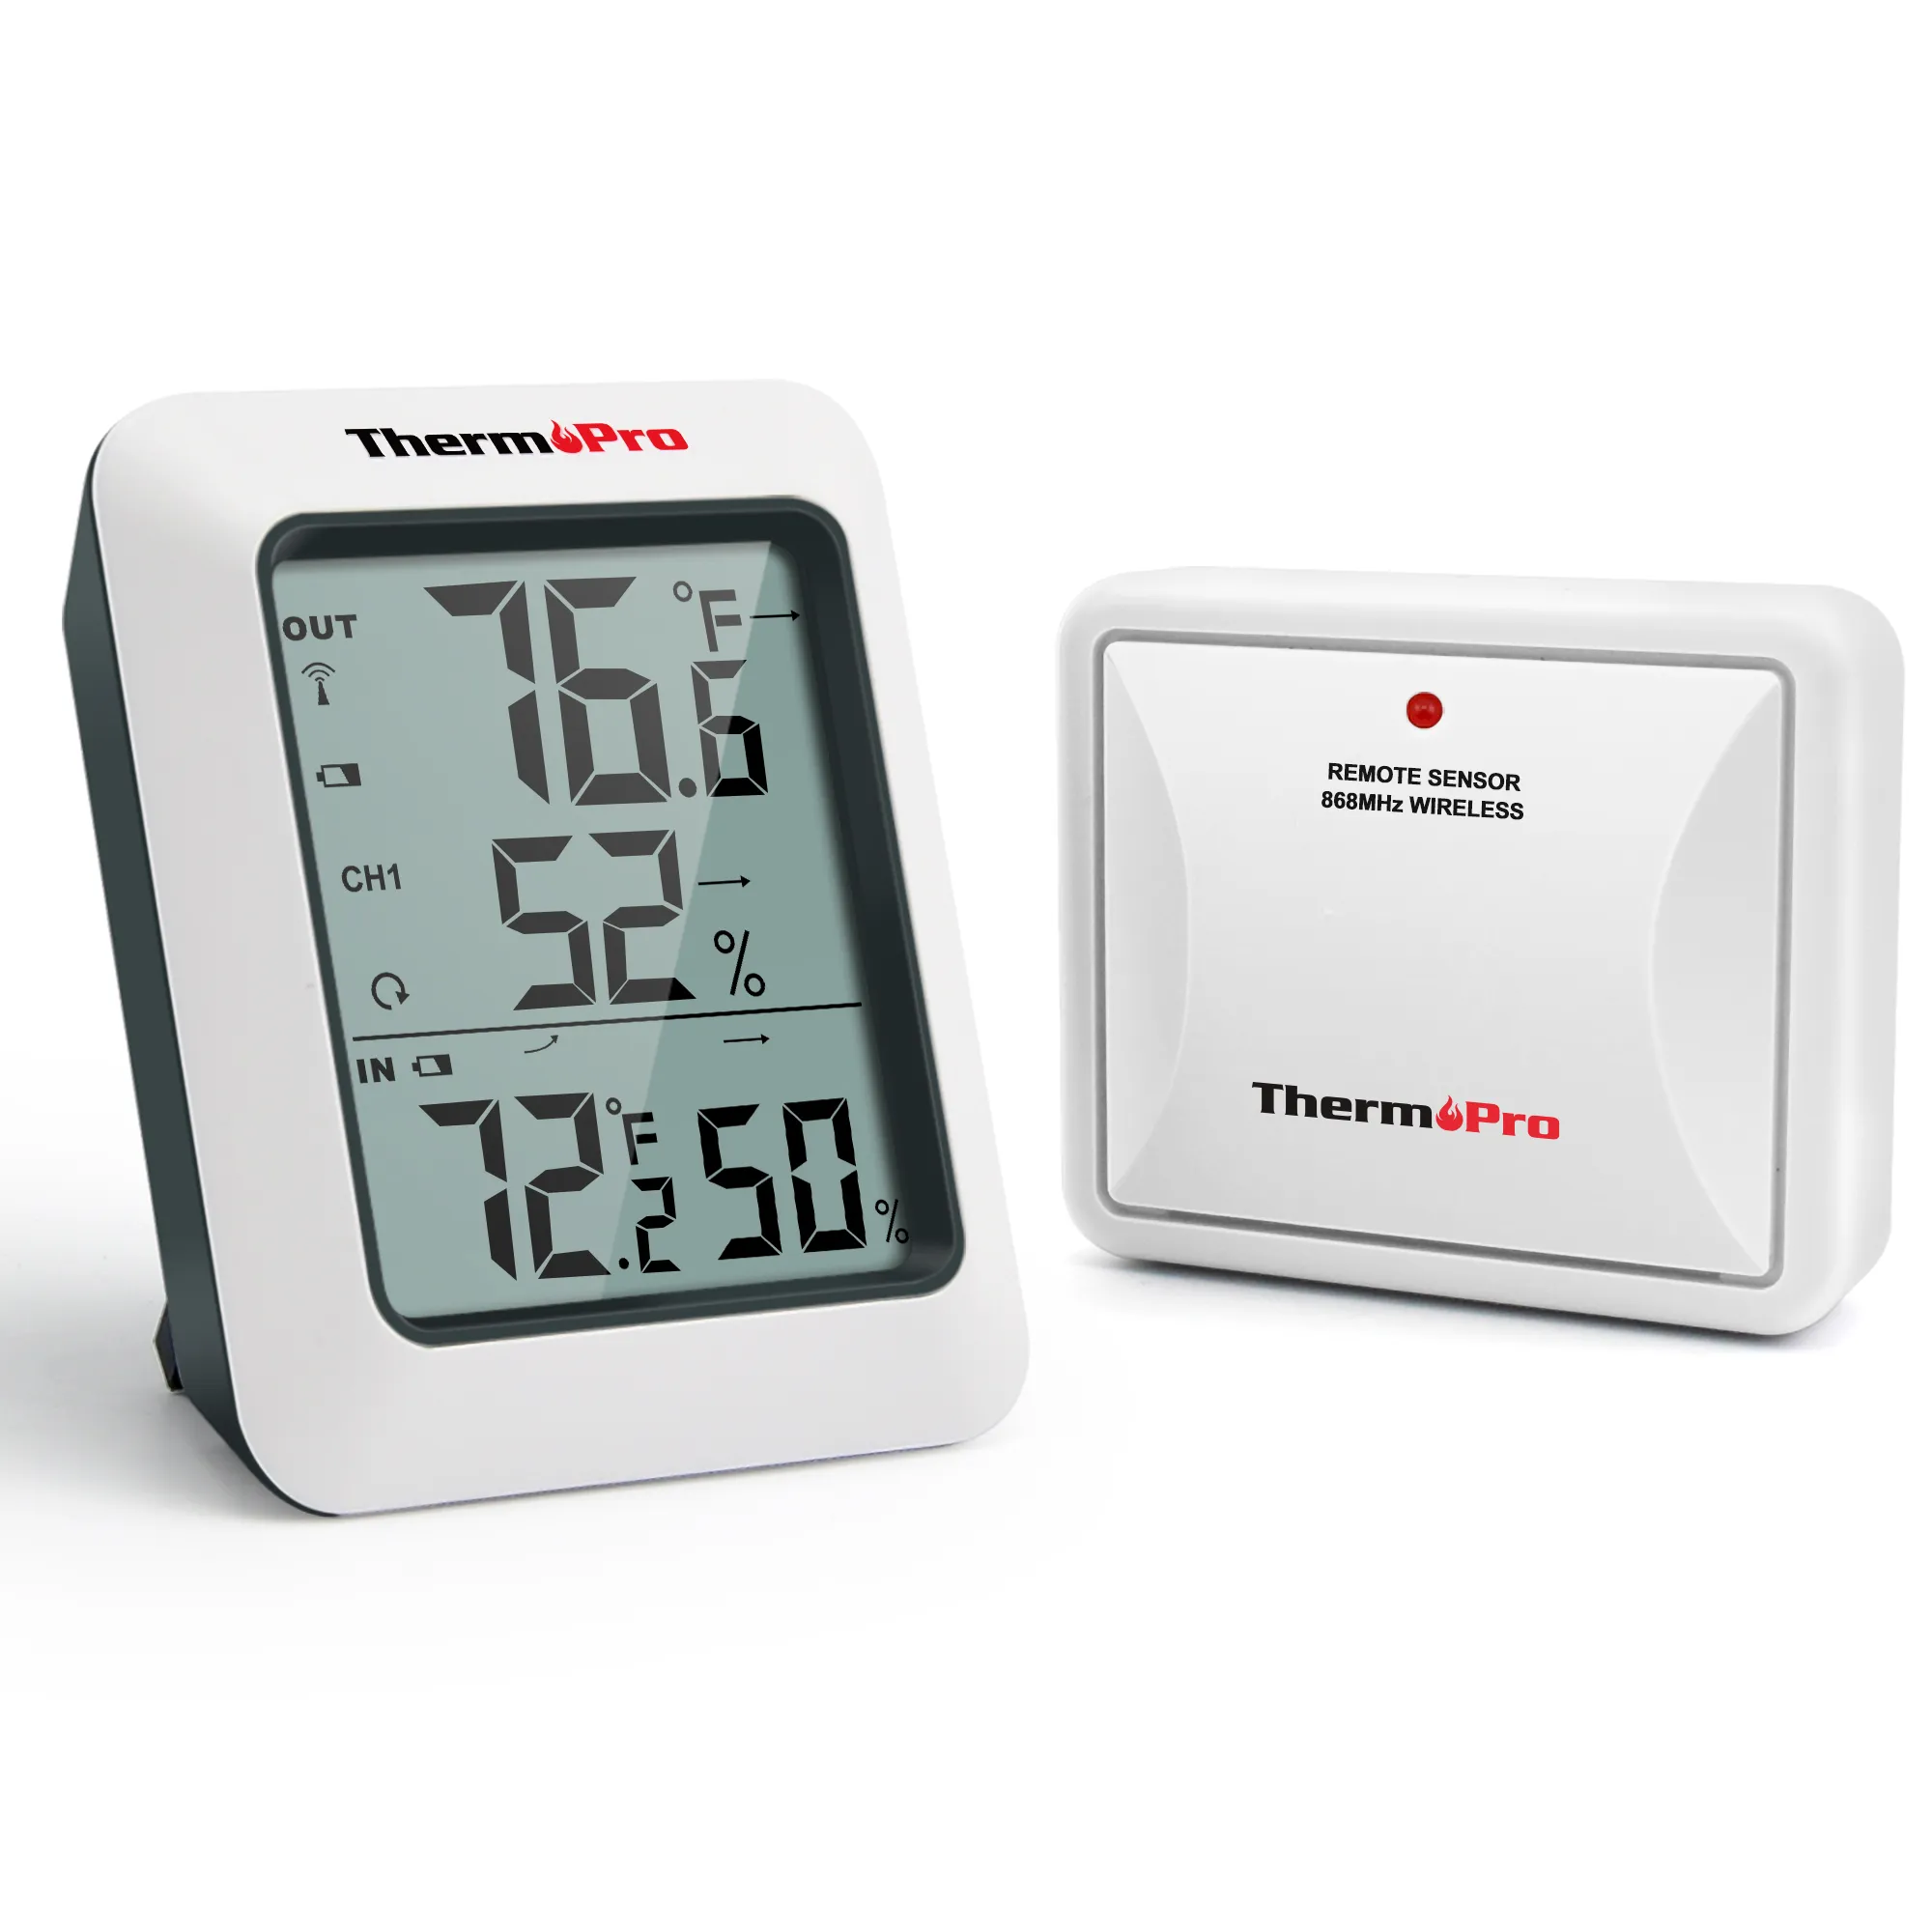 https://ae01.alicdn.com/kf/S38fff69ea8ac497f97161b2dda6d26b7I/ThermoPro-TP60C-60M-Wireless-Digital-Indoor-Outdoor-Thermometer-Hygrometer-Weather-Station-for-Home.jpg